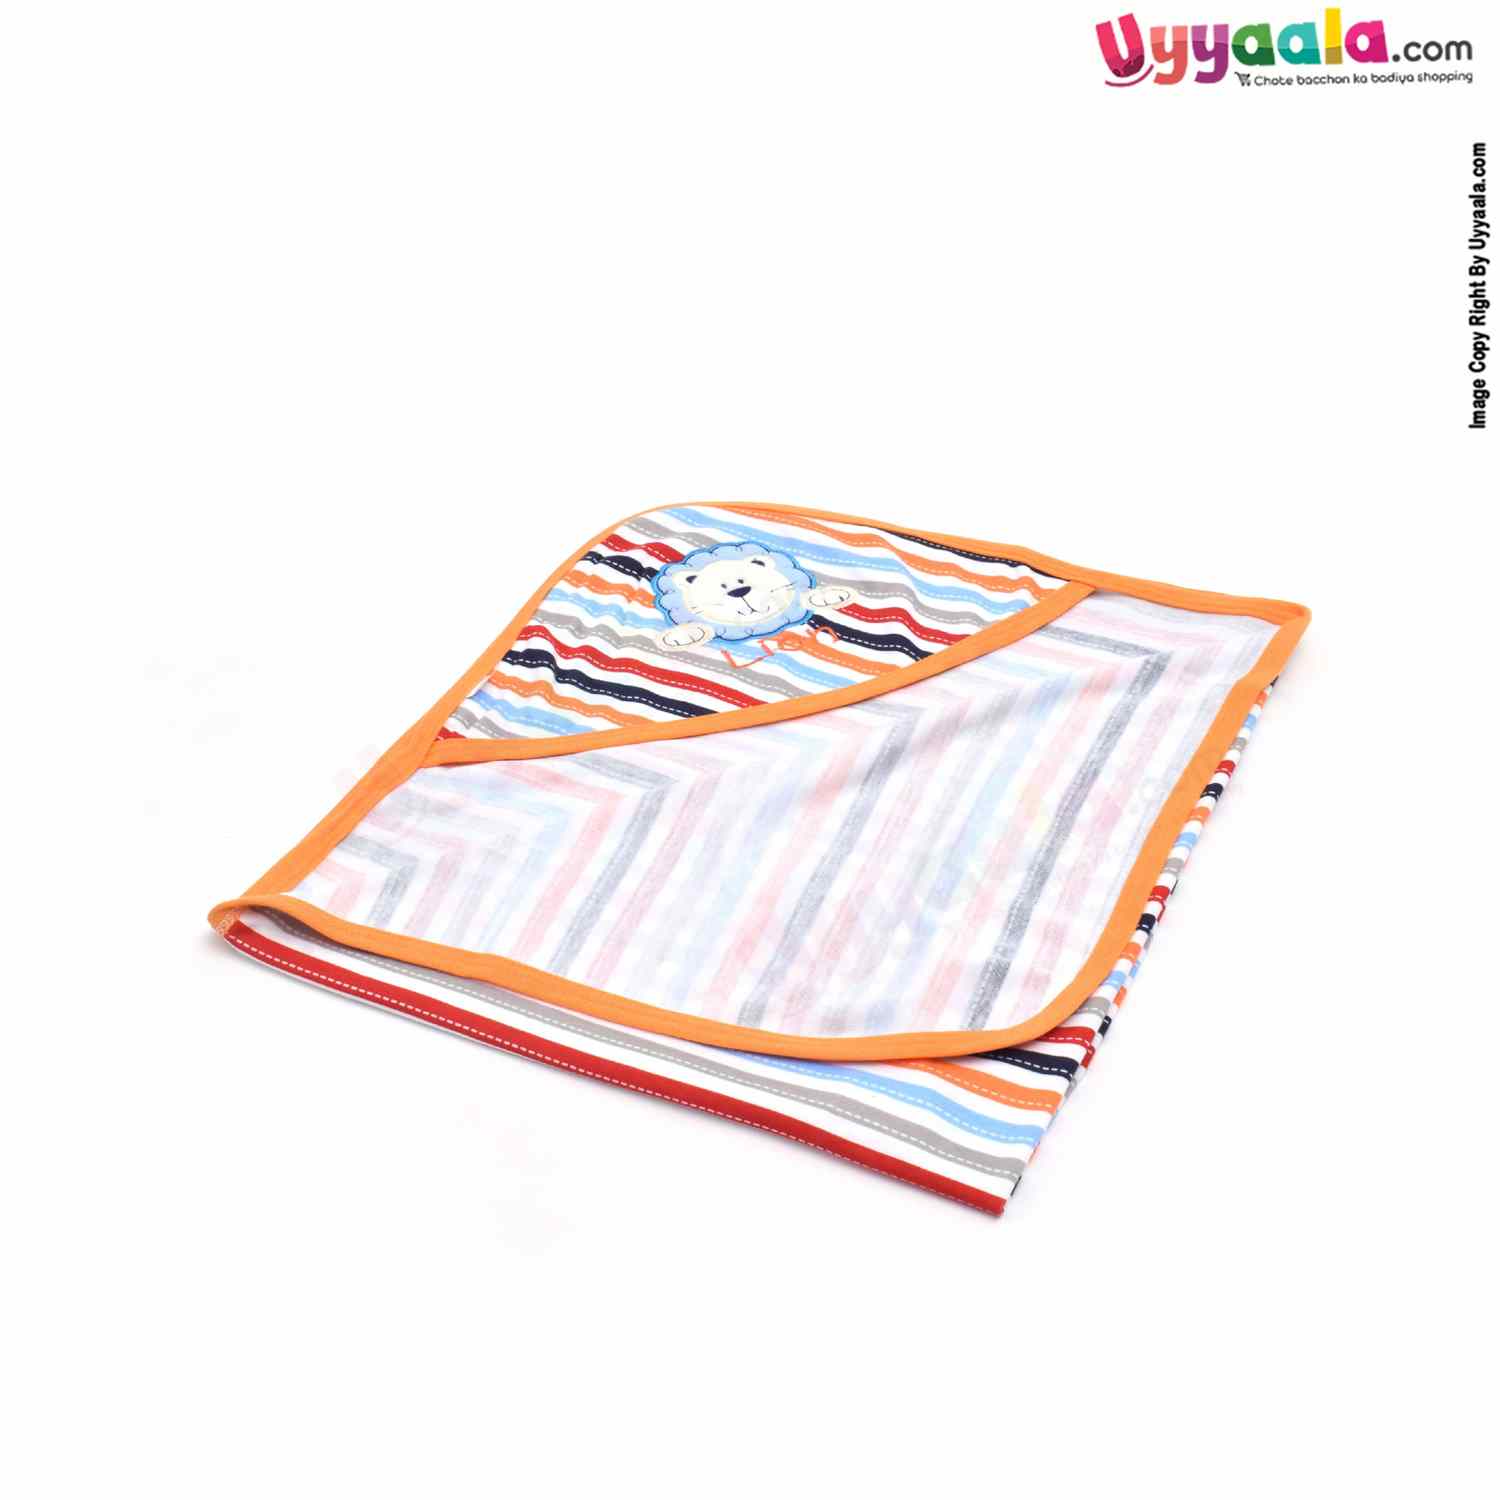 Cotton Hosiery Hooded Towel for Babies with Floral Print 1pc 0+m Age, Size (73*69Cm)- MultiColor